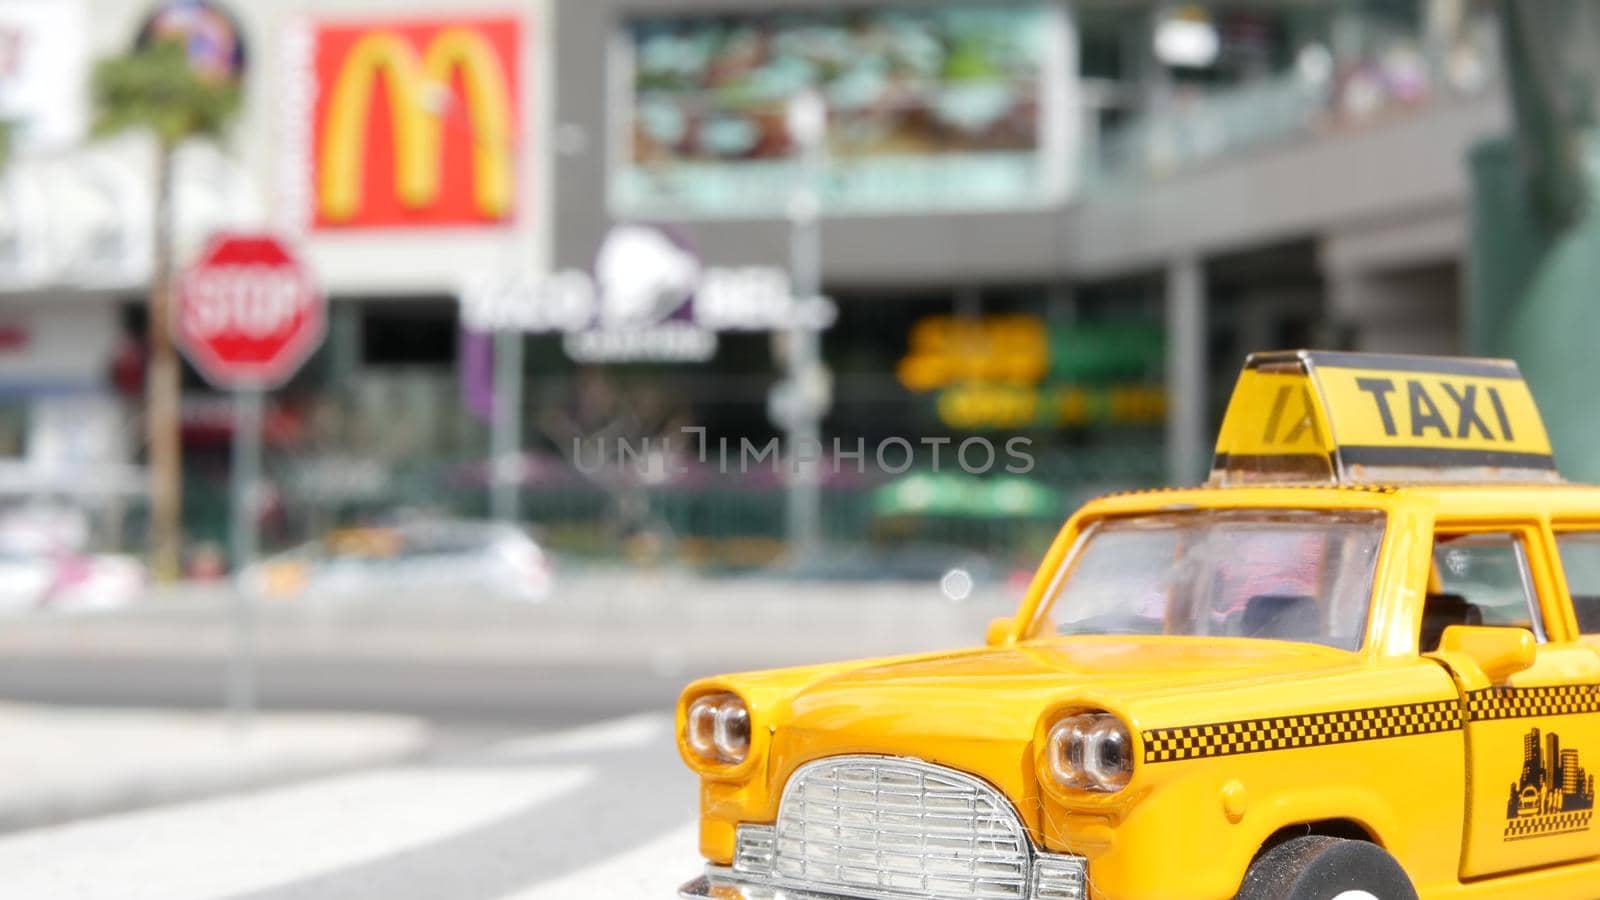 LAS VEGAS, NEVADA USA - 7 MAR 2020: Yellow vacant mini taxi cab close up on Harmon avenue corner. Small retro car model. Little iconic auto toy as symbol of transport against american shopping mall.